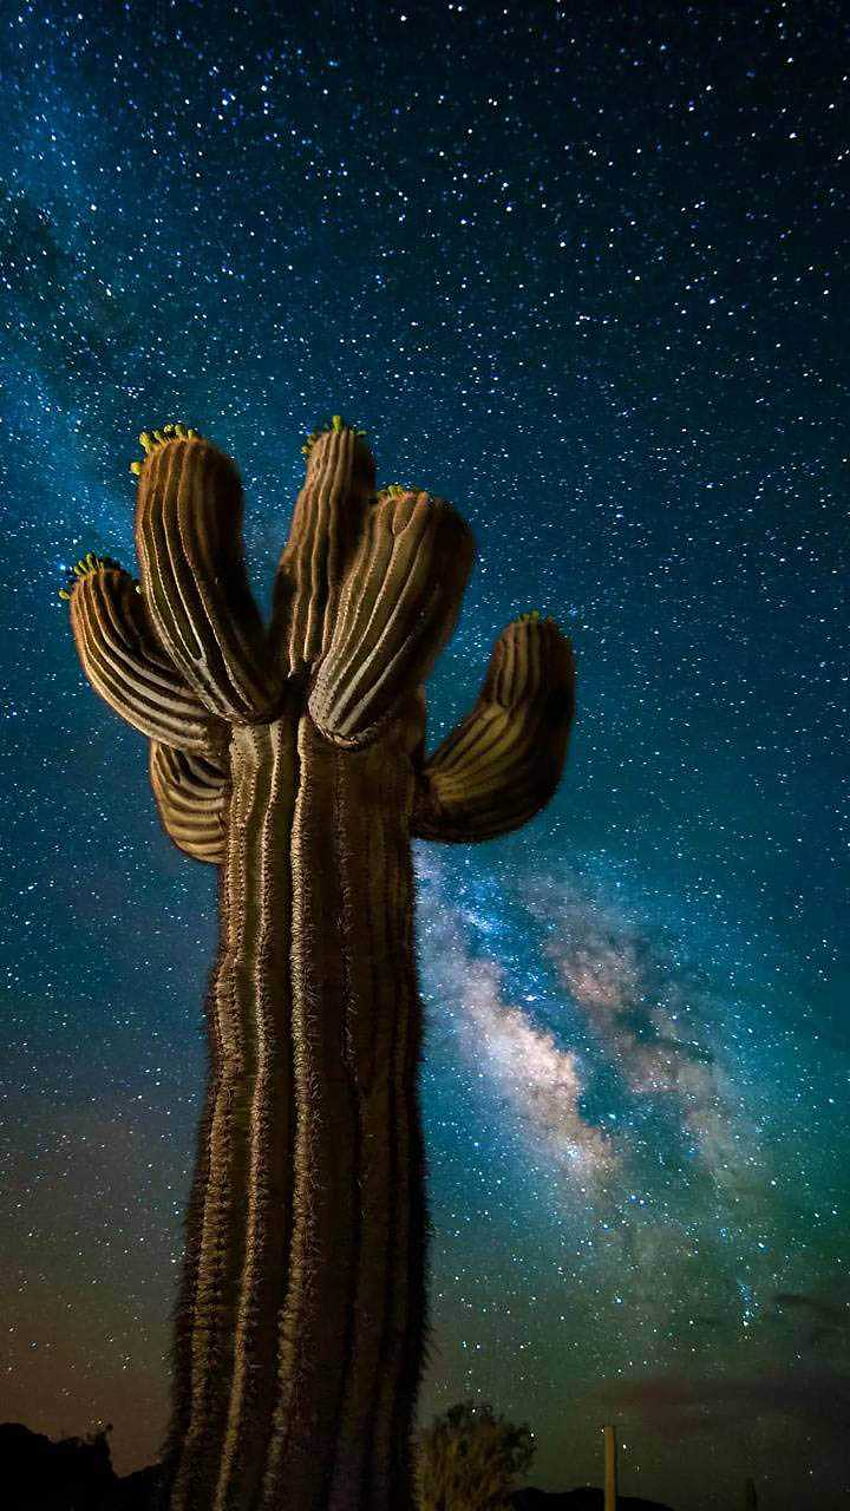 iPhone Cactus - Awesome, Cool Cactus HD phone wallpaper